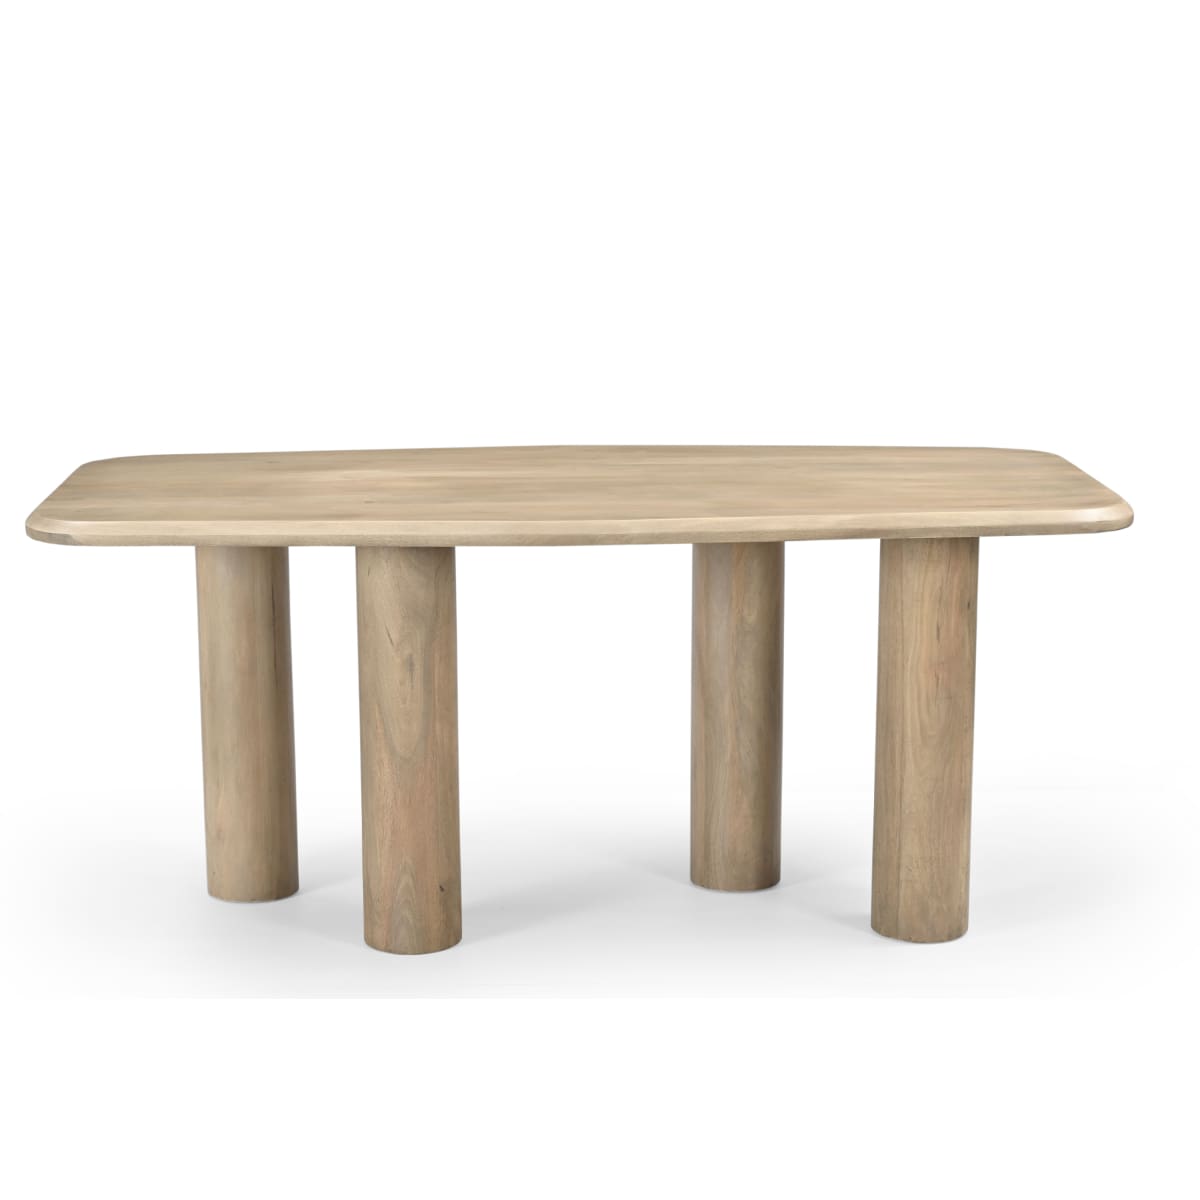 Lotus Mango Wood Dining Table - 70.87W X 35.43D X 30H. - dining-table